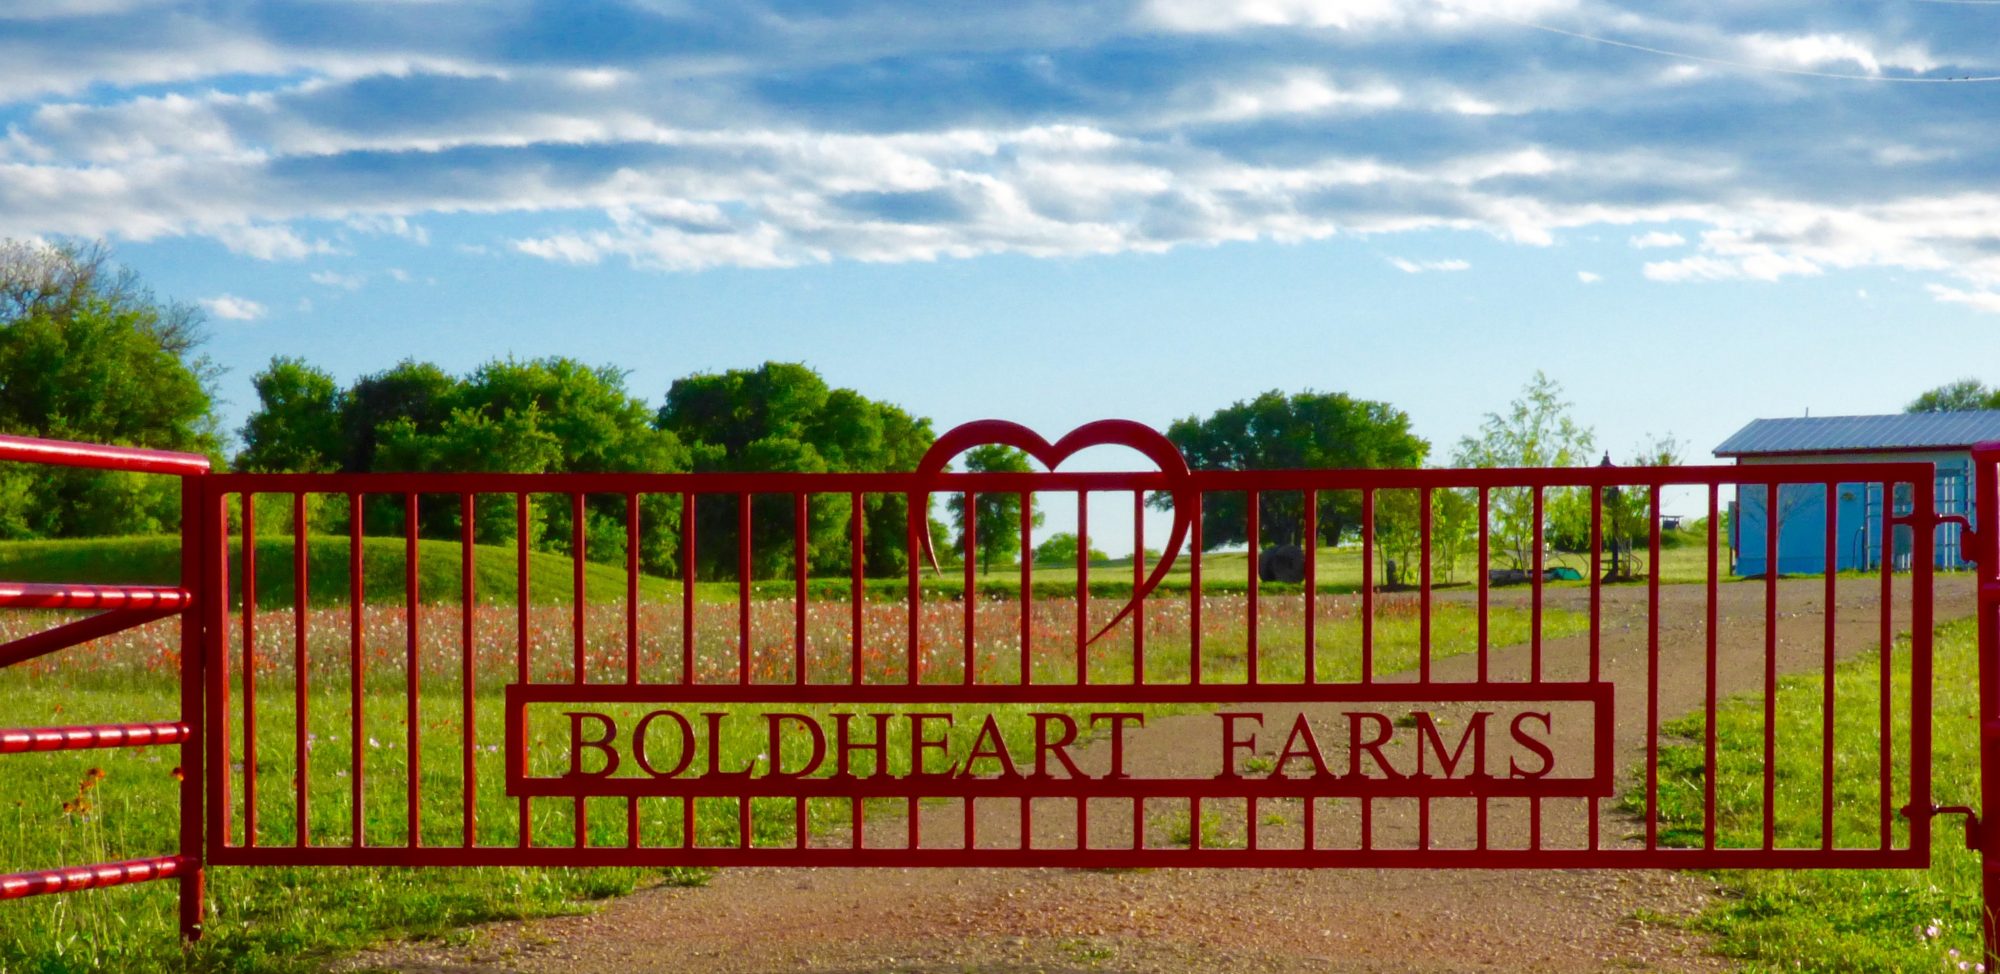 The Cottages at Boldheart Farms a luxury Bed and Breakfast in Central Texas